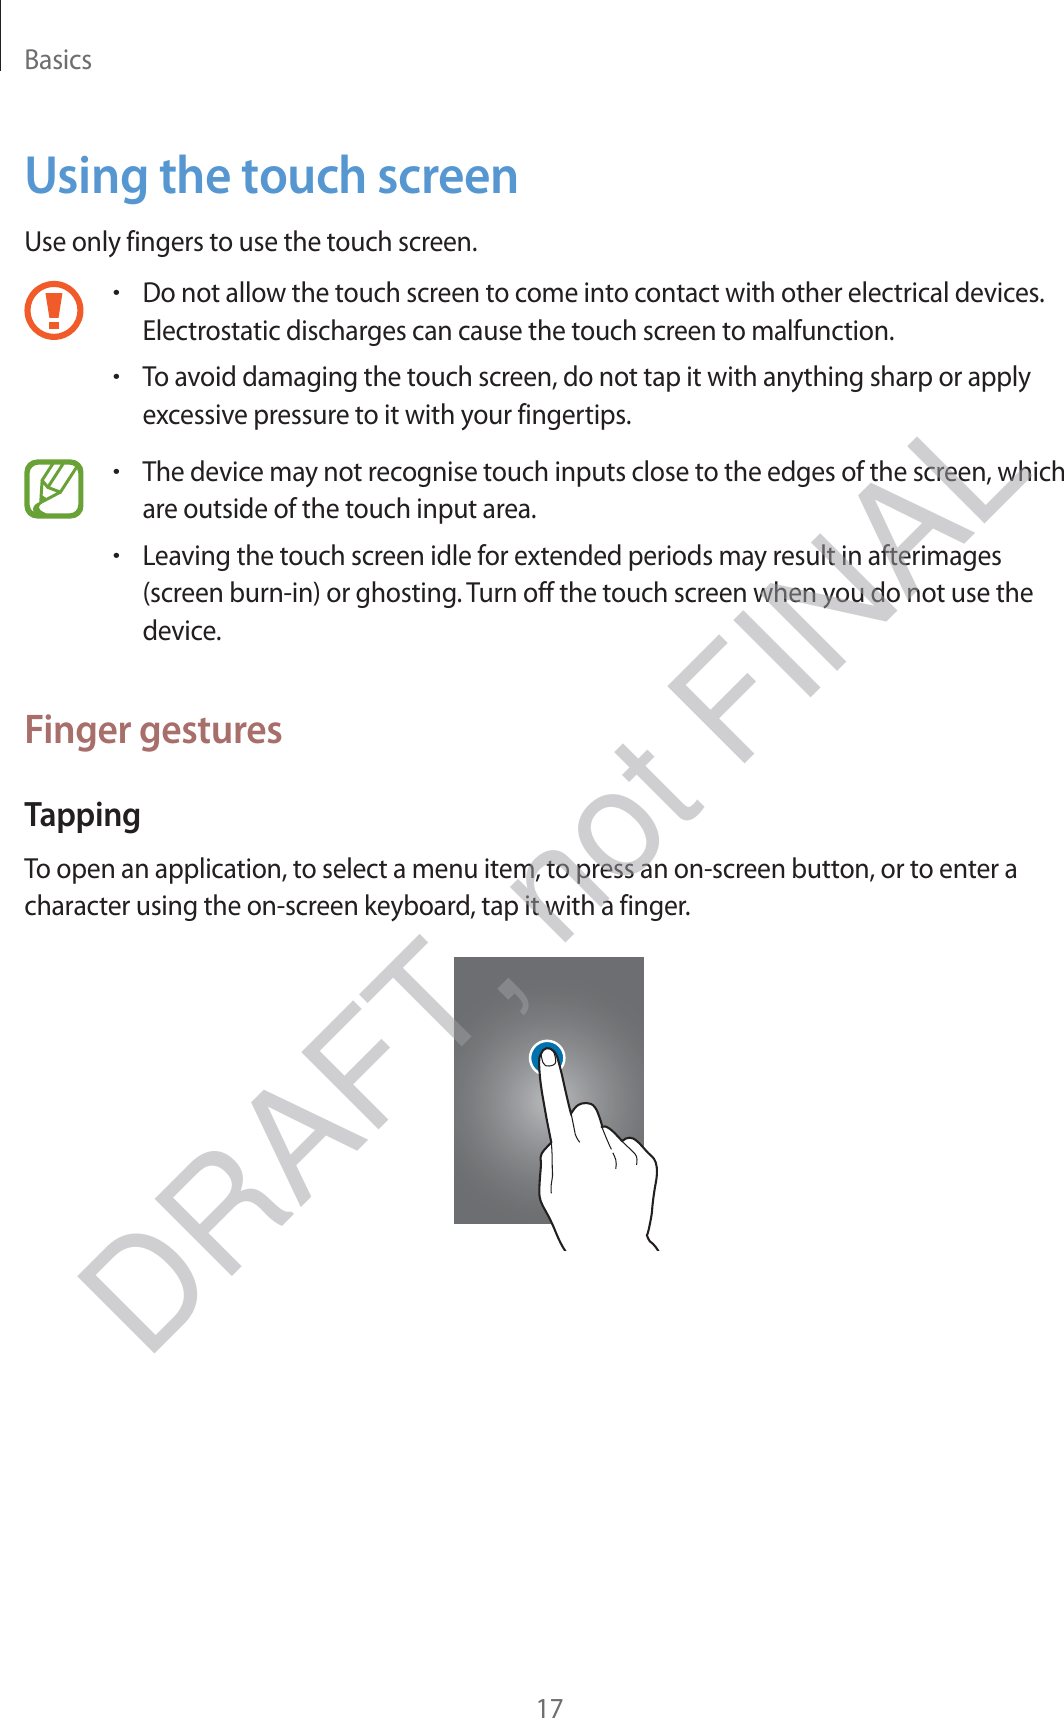 Basics17Using the touch screenUse only fingers to use the touch screen.rDo not allow the touch screen to come into contact with other electrical devices. Electrostatic discharges can cause the touch screen to malfunction.rTo avoid damaging the touch screen, do not tap it with anything sharp or apply excessive pressure to it with your fingertips.rThe device may not recognise touch inputs close to the edges of the screen, which are outside of the touch input area.rLeaving the touch screen idle for extended periods may result in afterimages (screen burn-in) or ghosting. Turn off the touch screen when you do not use the device.Finger gesturesTappingTo open an application, to select a menu item, to press an on-screen button, or to enter a character using the on-screen keyboard, tap it with a finger.DRAFT, not FINAL